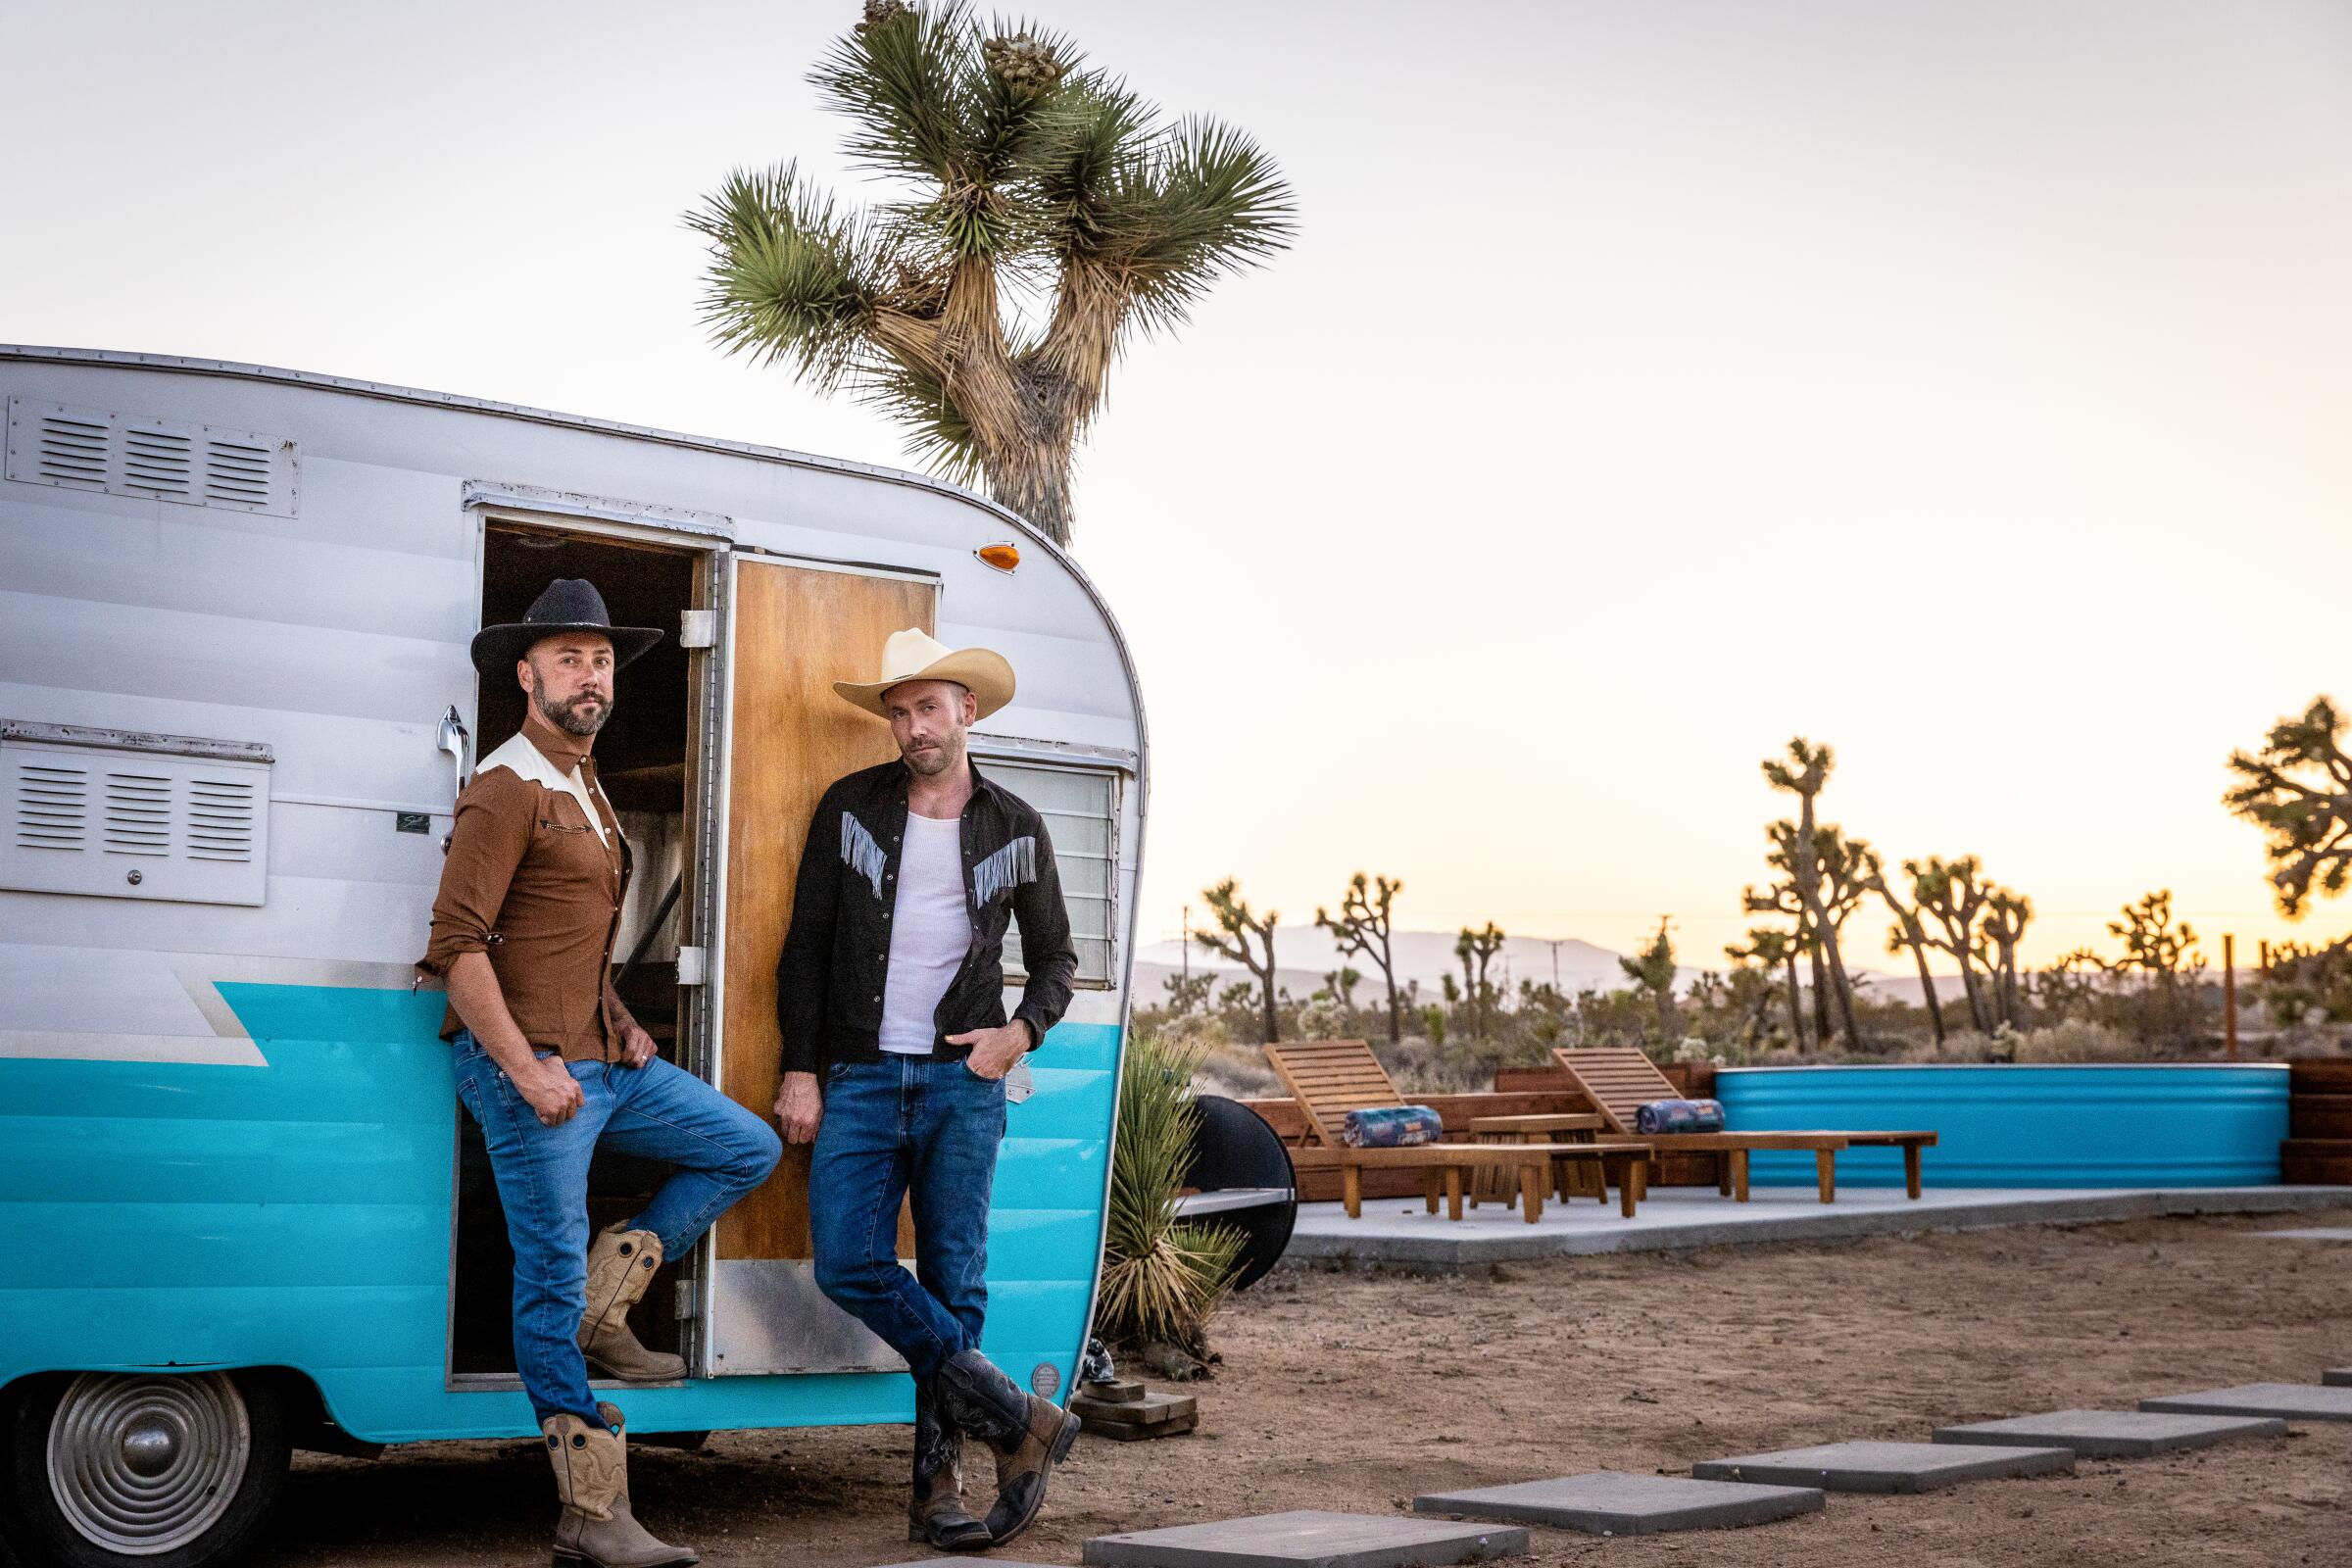 Two men in western garb and cowboy hats stand in front of a camper next to a stock tank pool.